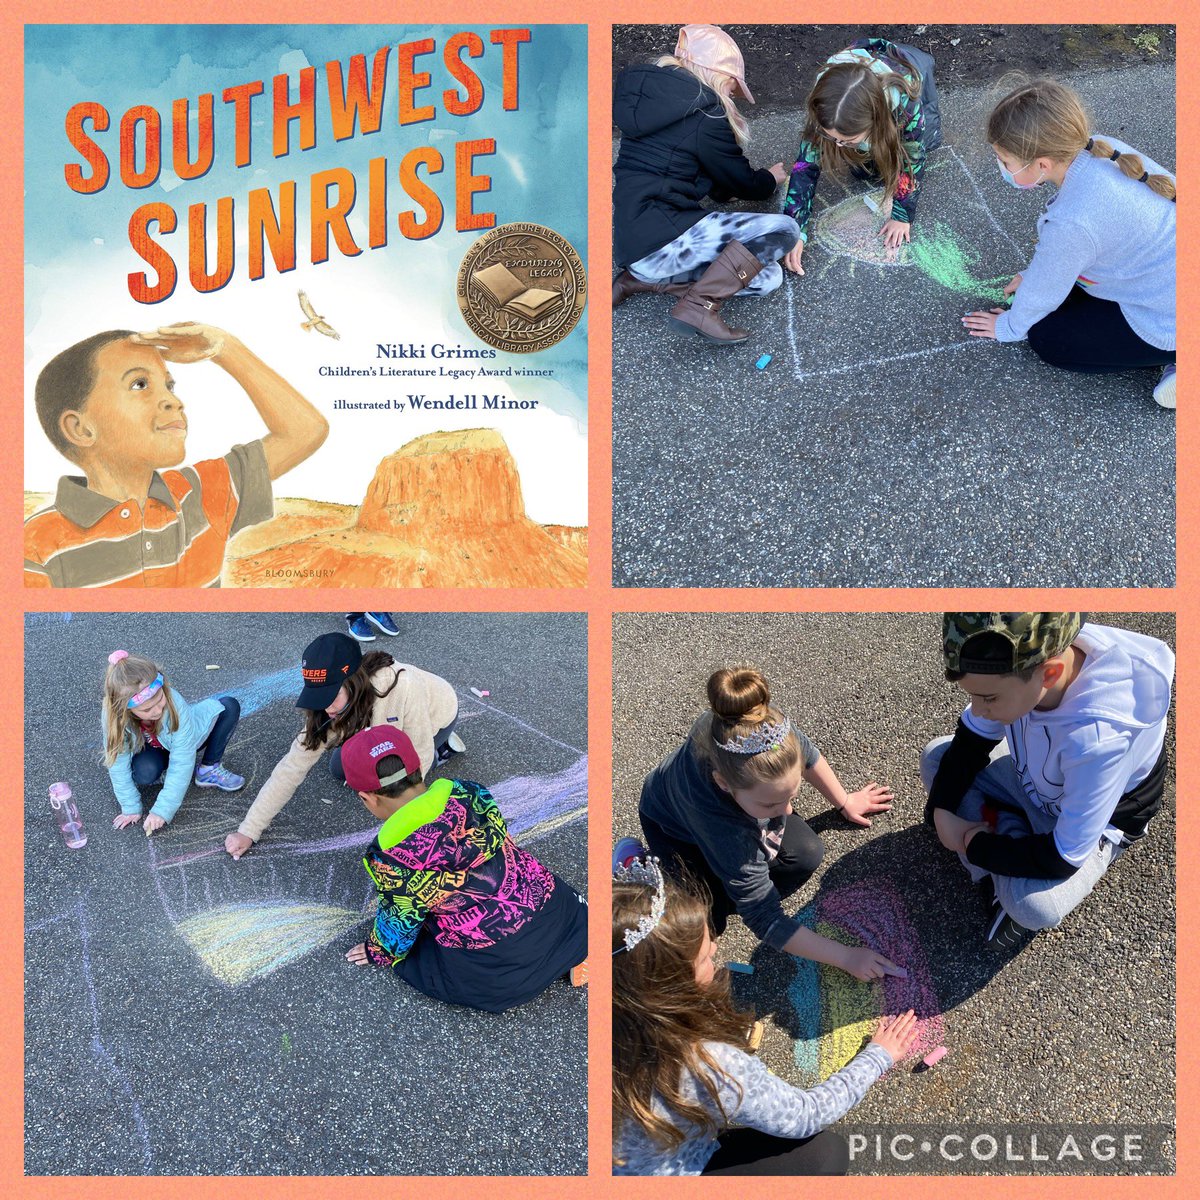 Creating our own sunrises as we celebrate the Southwest for Read Across America 🌅 #jaguarmax